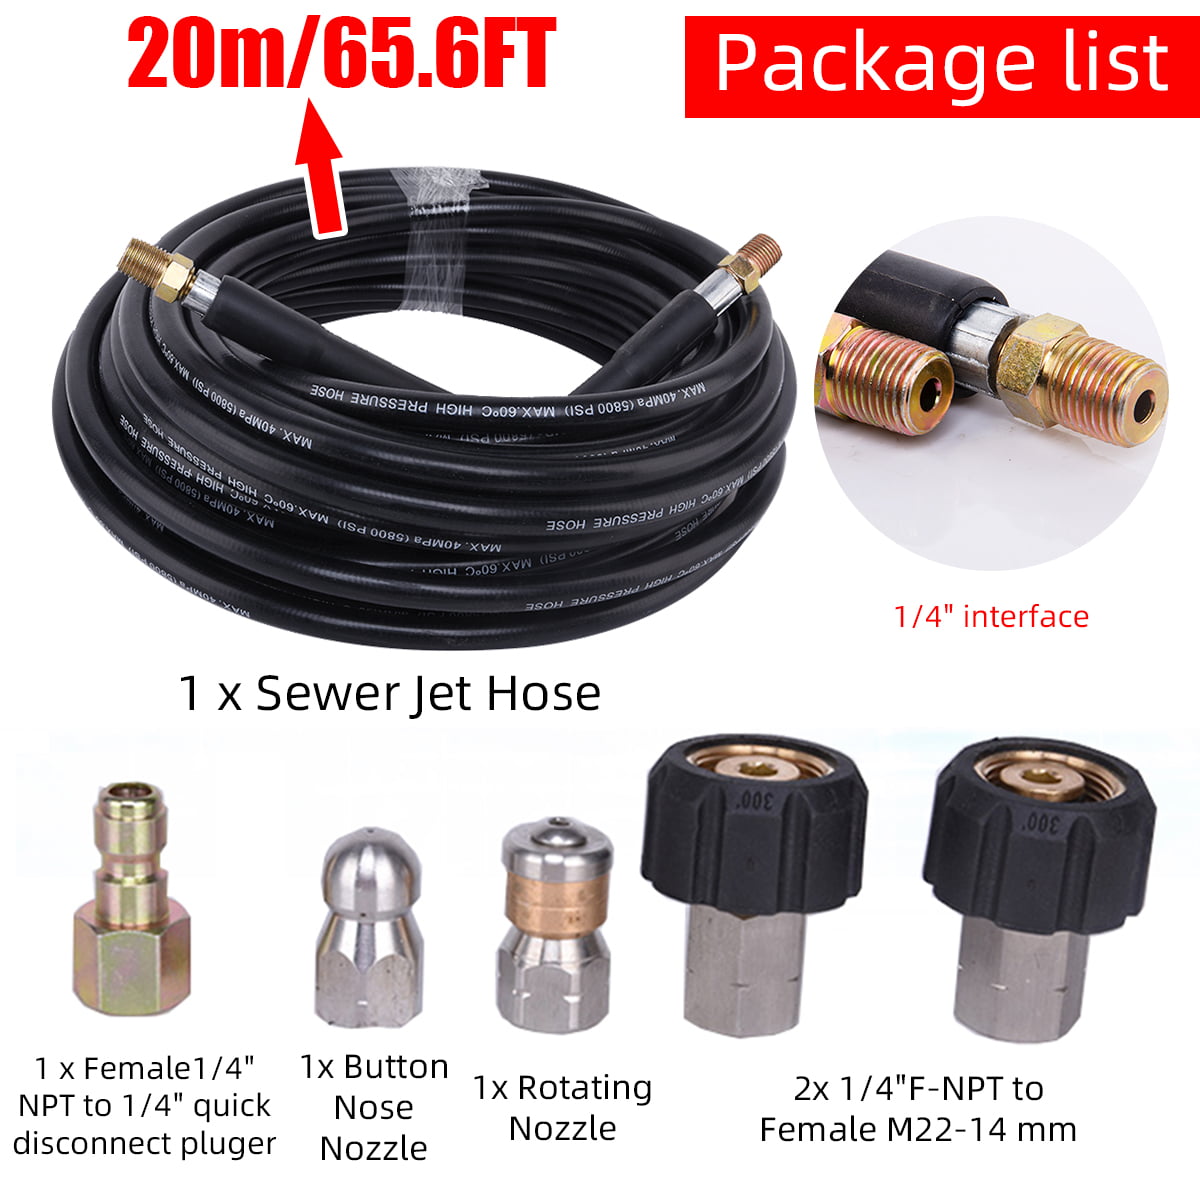 High Pressure Washer Sewer Jetter Kit-50 FT 3000 PSI Drain Cleaning Hose Perfect 